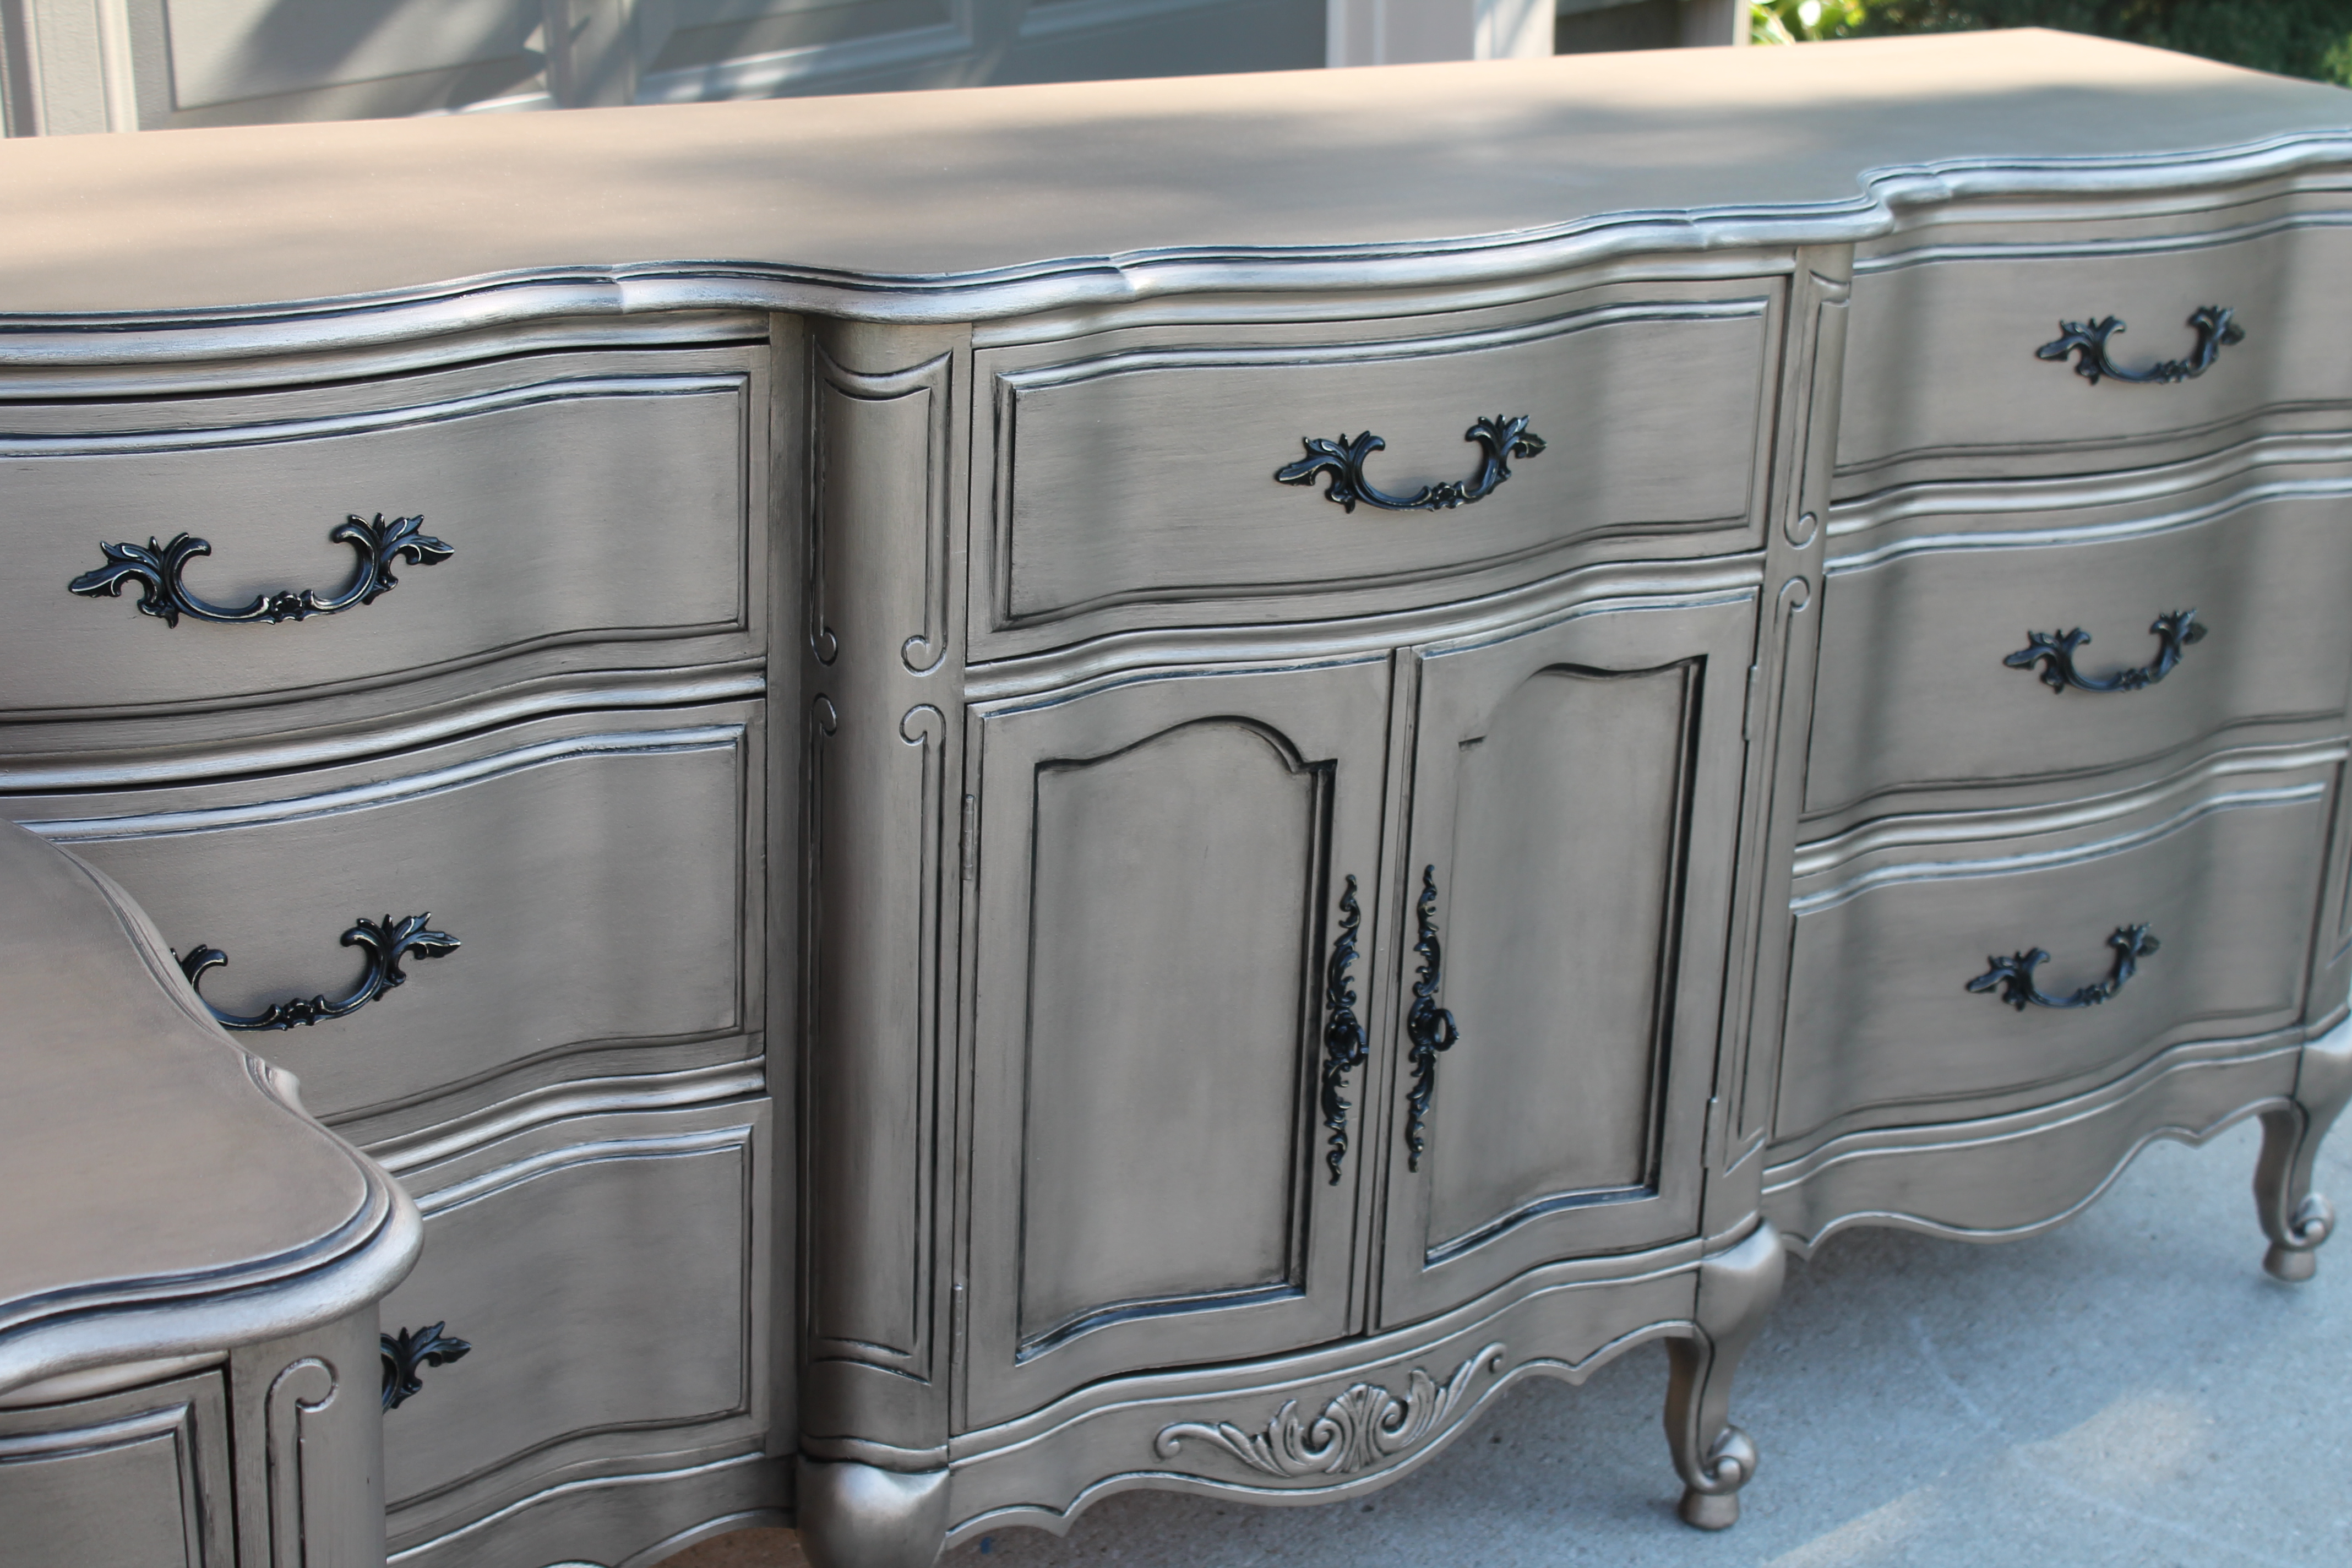 Insane Metallic Painted Furniture That Will Give You Shimmer